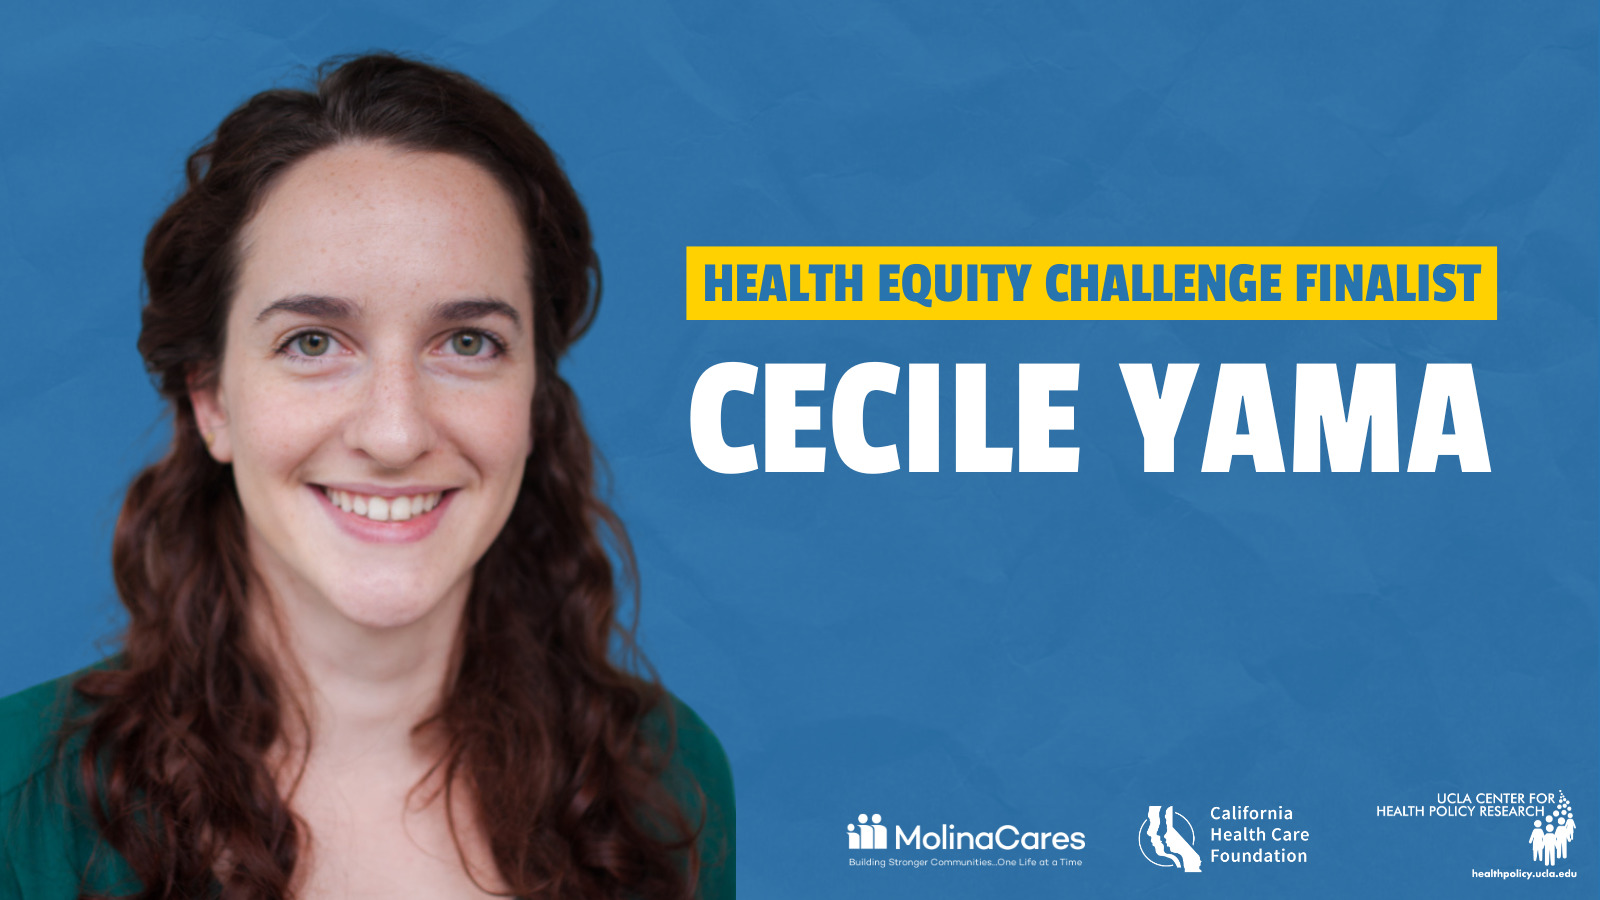 Cecile Yama photo with Health Equity Challenge banner and logos